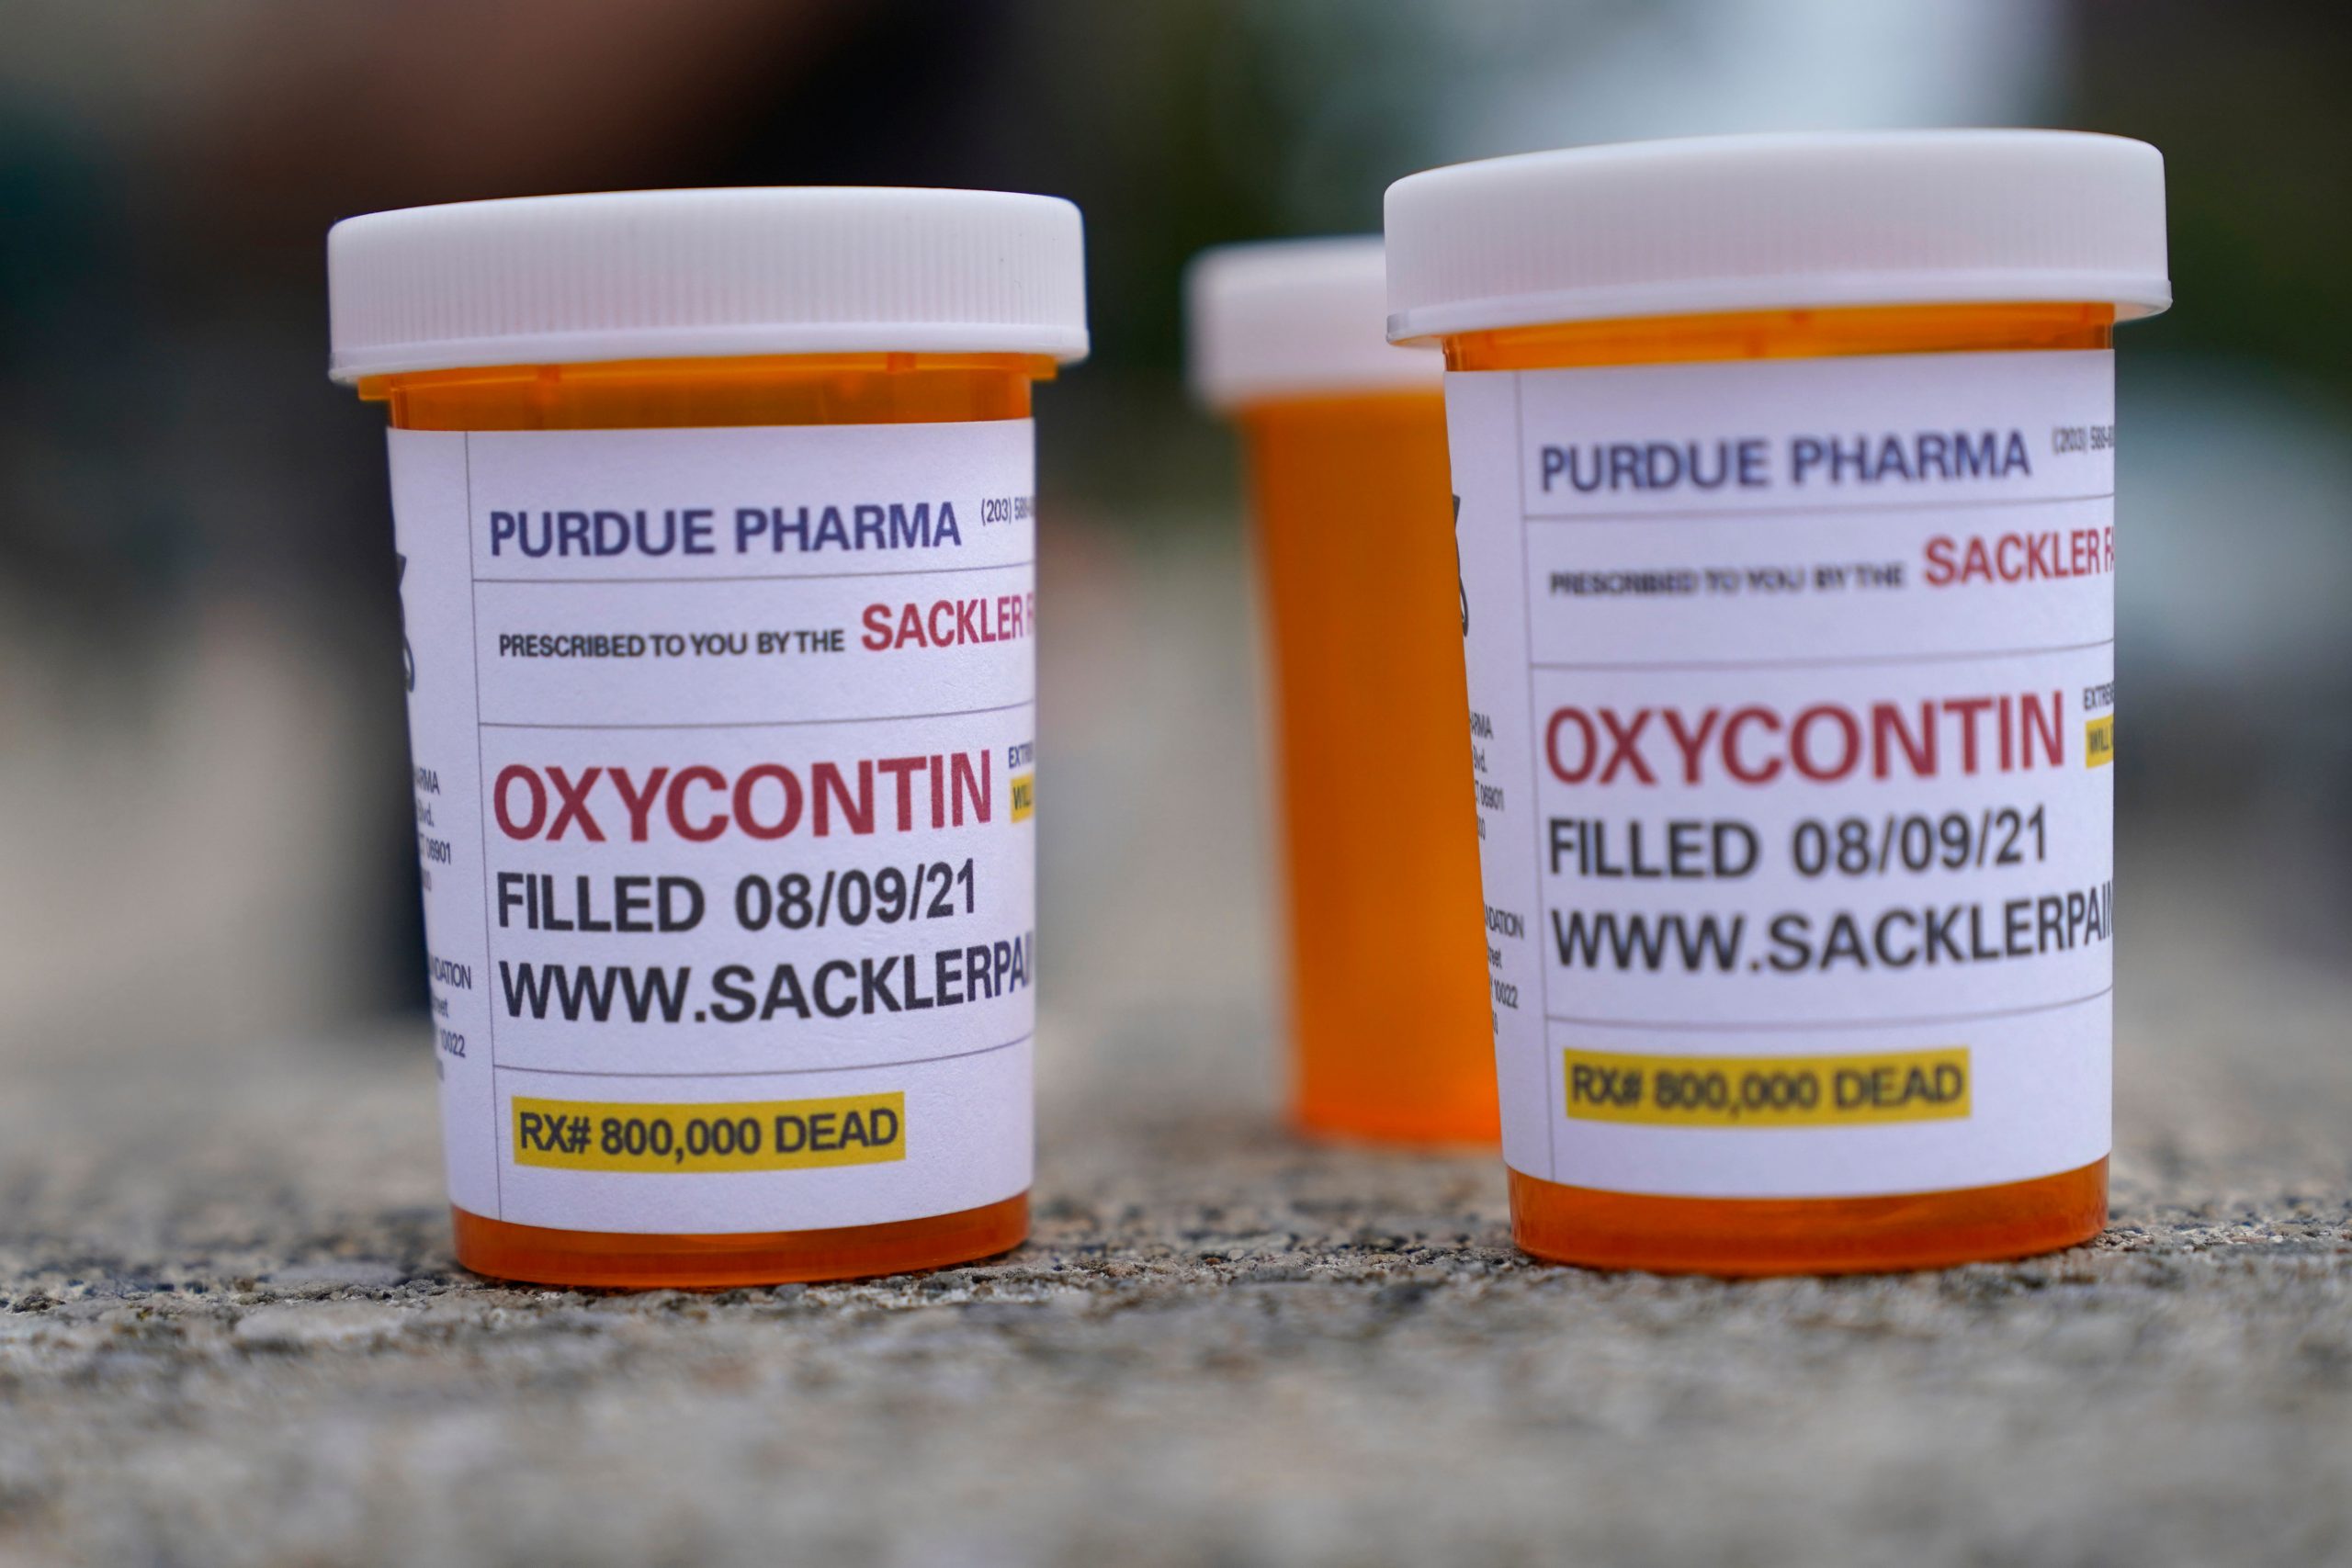 Judge gives conditional approval to Purdue Pharma opioid settlement